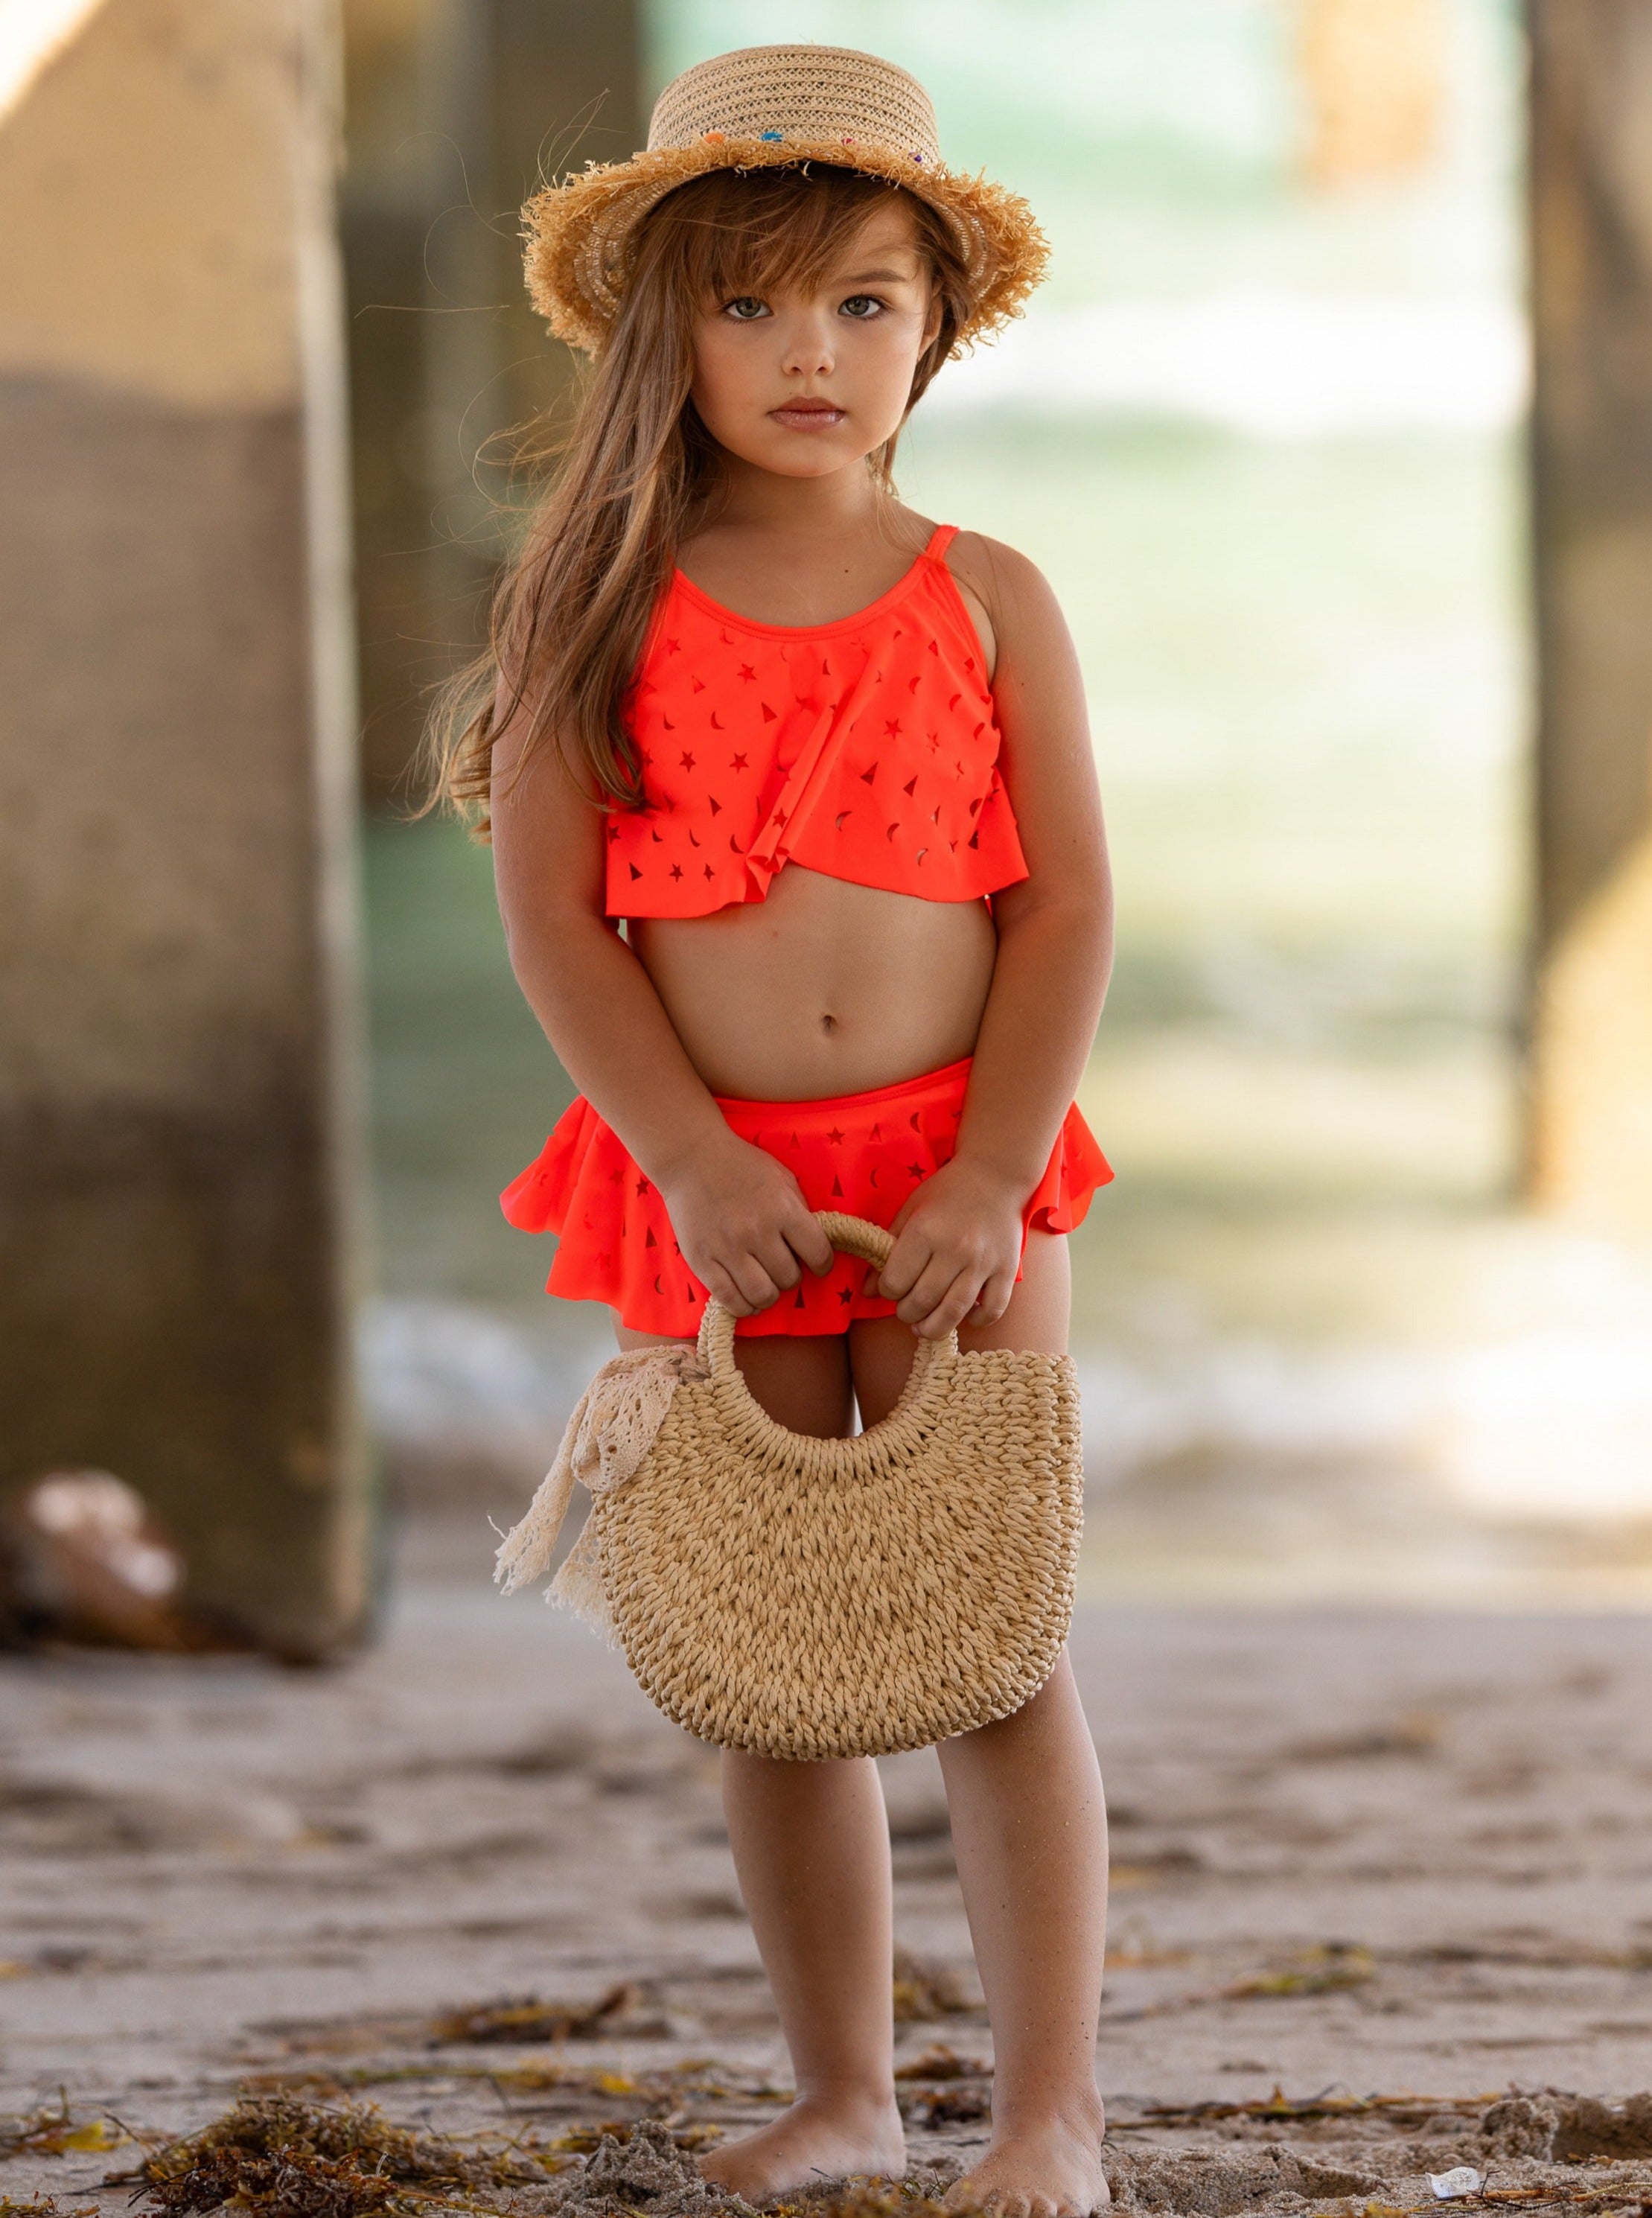 Moon N' Stars Skirted Two Piece Swimsuit